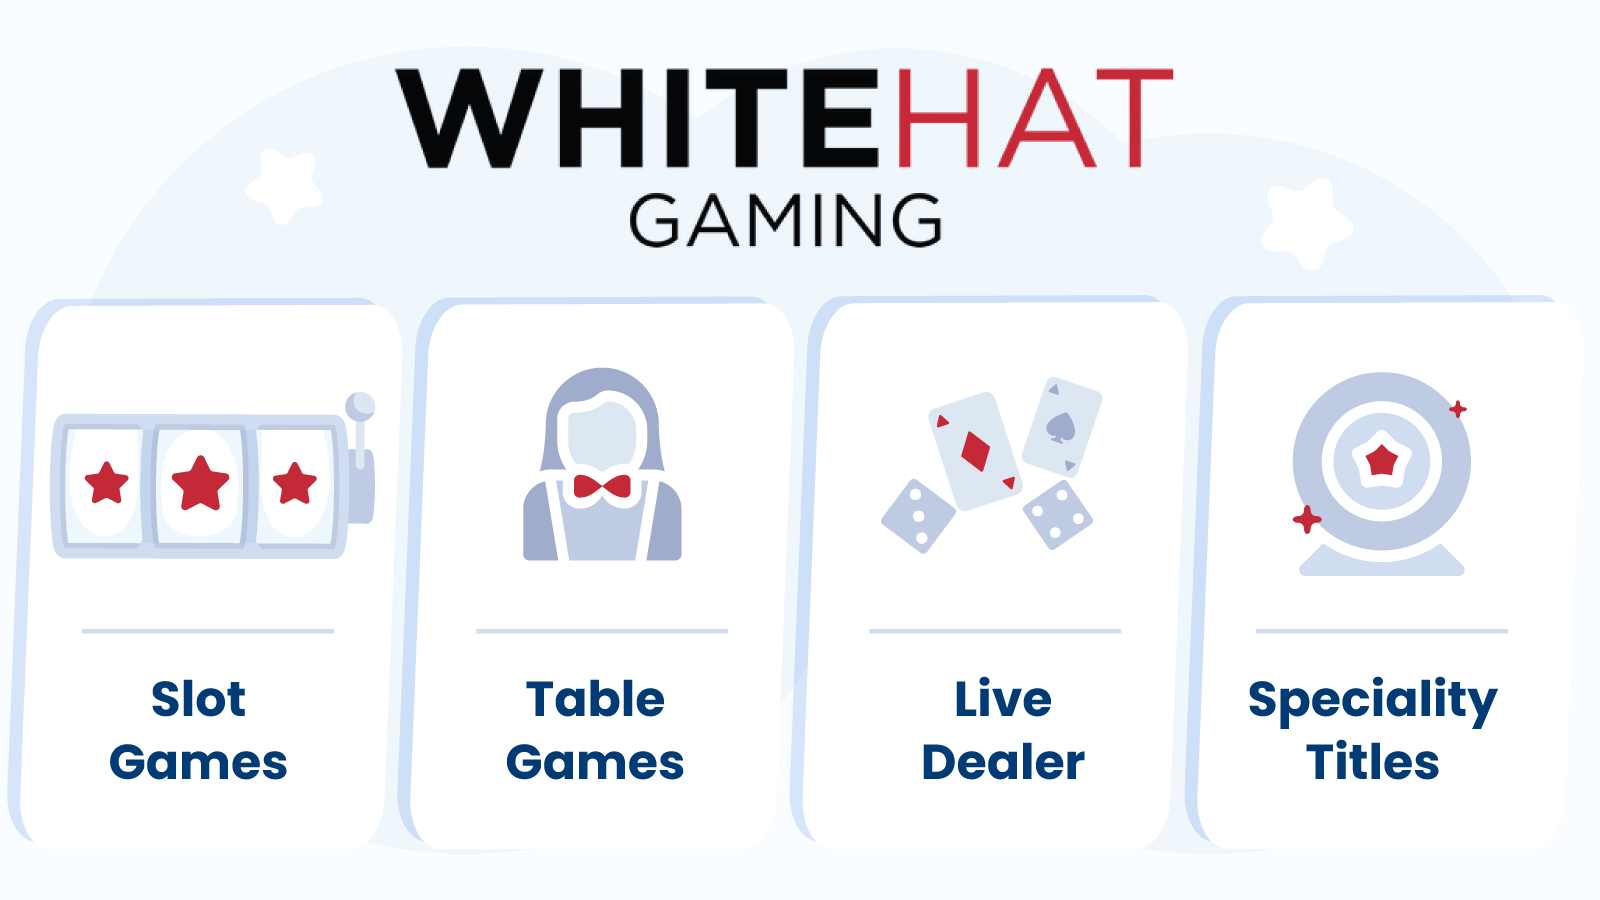 Games & Providers on White Hat Gaming Sites